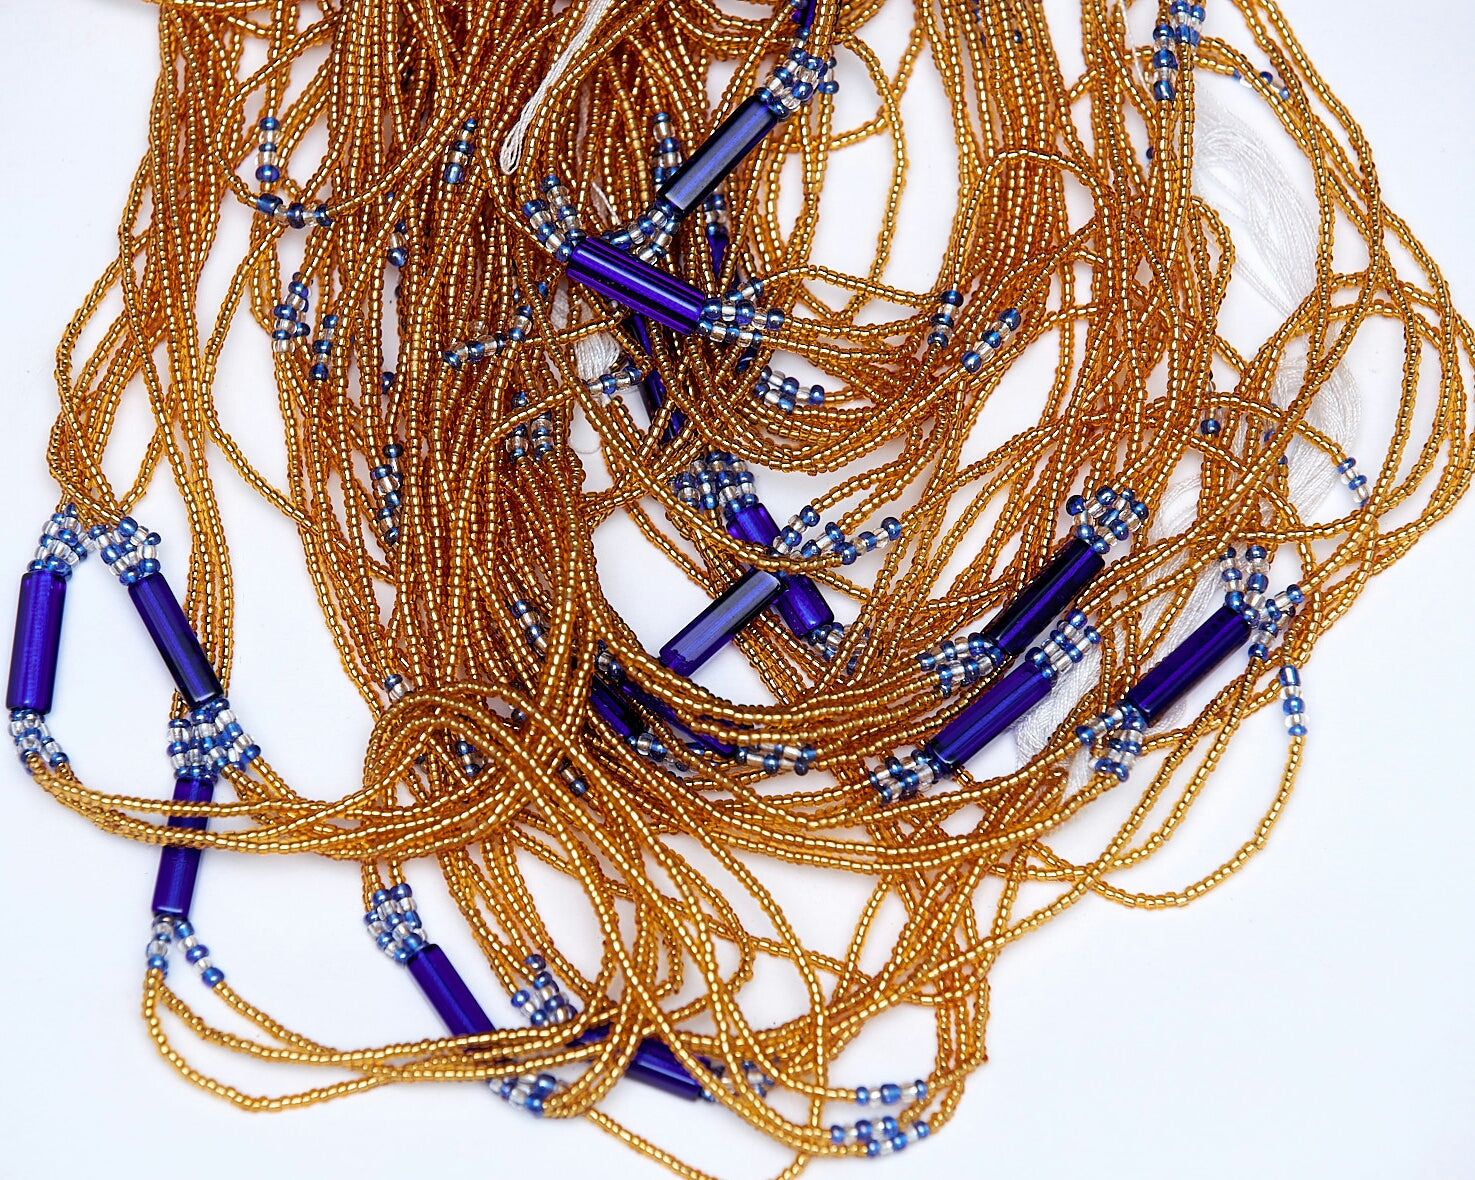 44 Inches Long Gold,Blue,White With Blue Bars Coloured 3-in-One Waist Beads